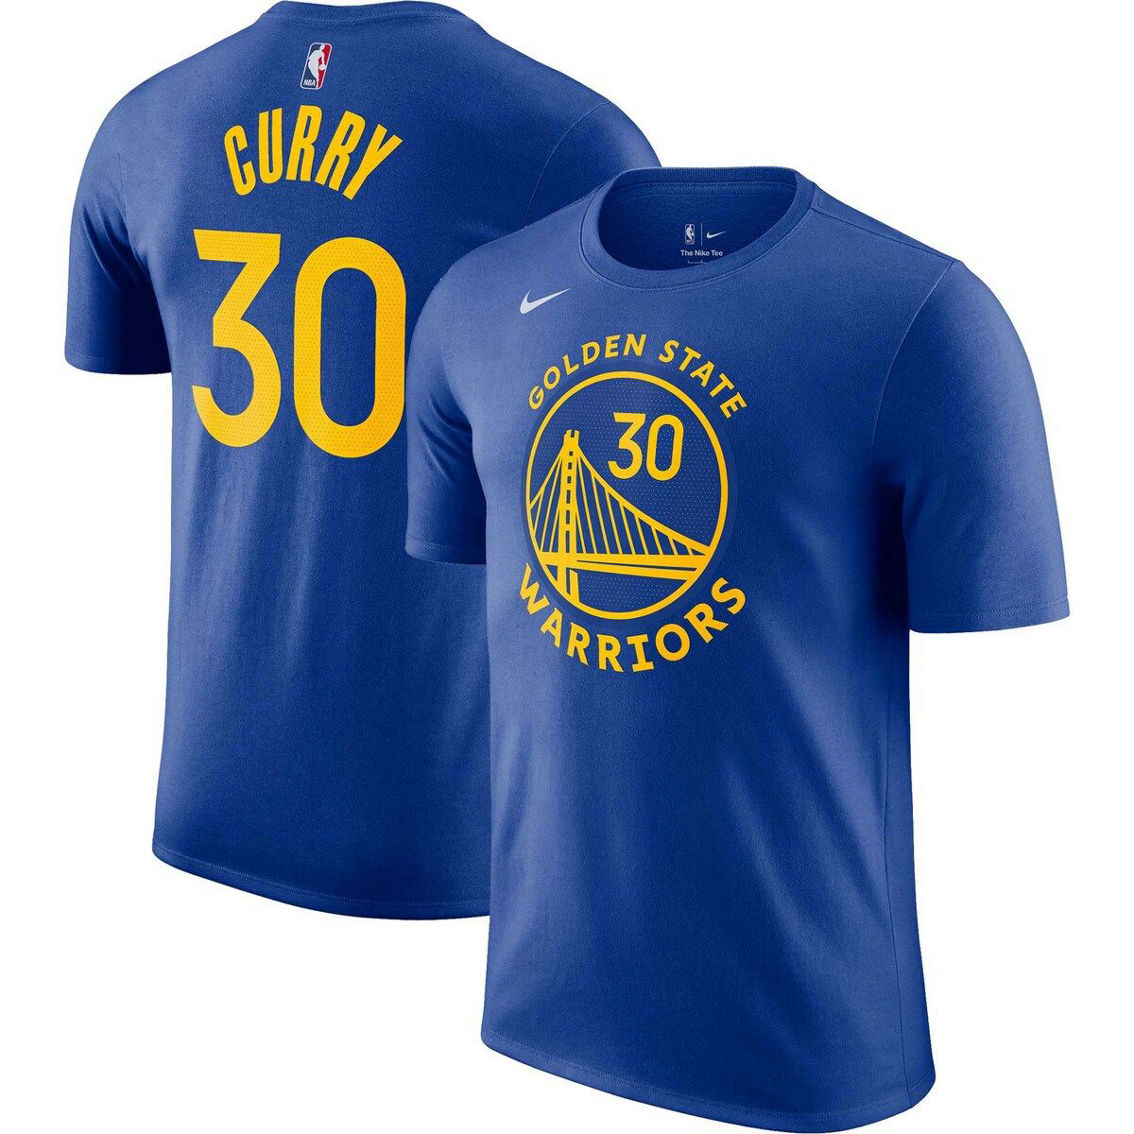 Nike Men's Stephen Curry Royal Golden State Warriors Icon 2022/23 Name & Number T-Shirt - Image 2 of 4